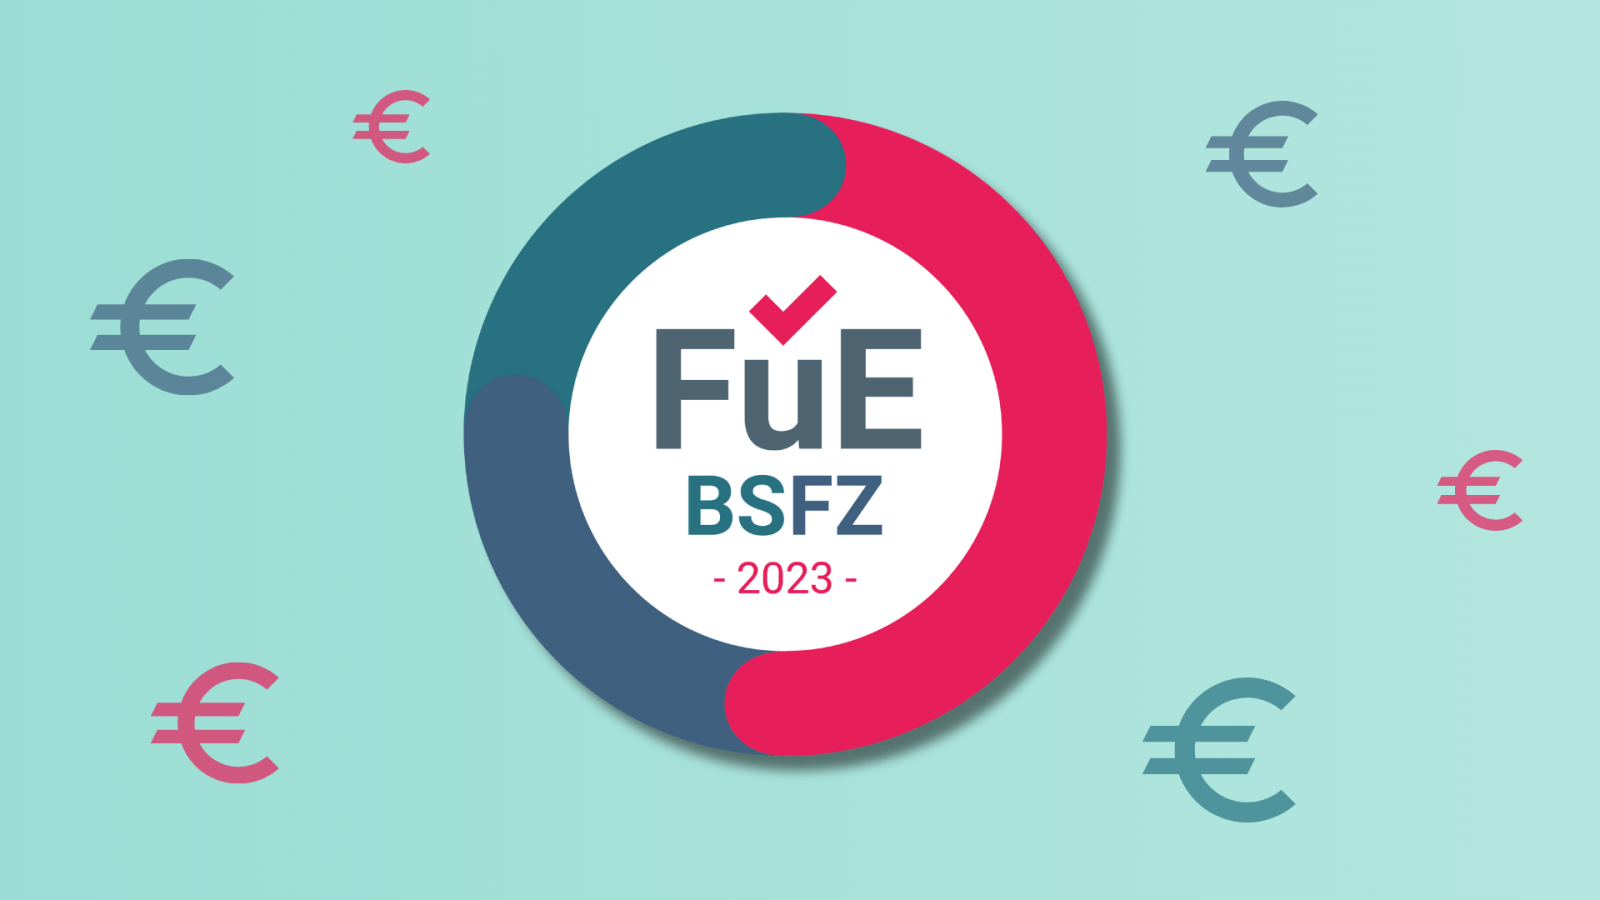 fulfin receives €1.1mio research funding for its innovative AI-enabled credit scoring for SMEs